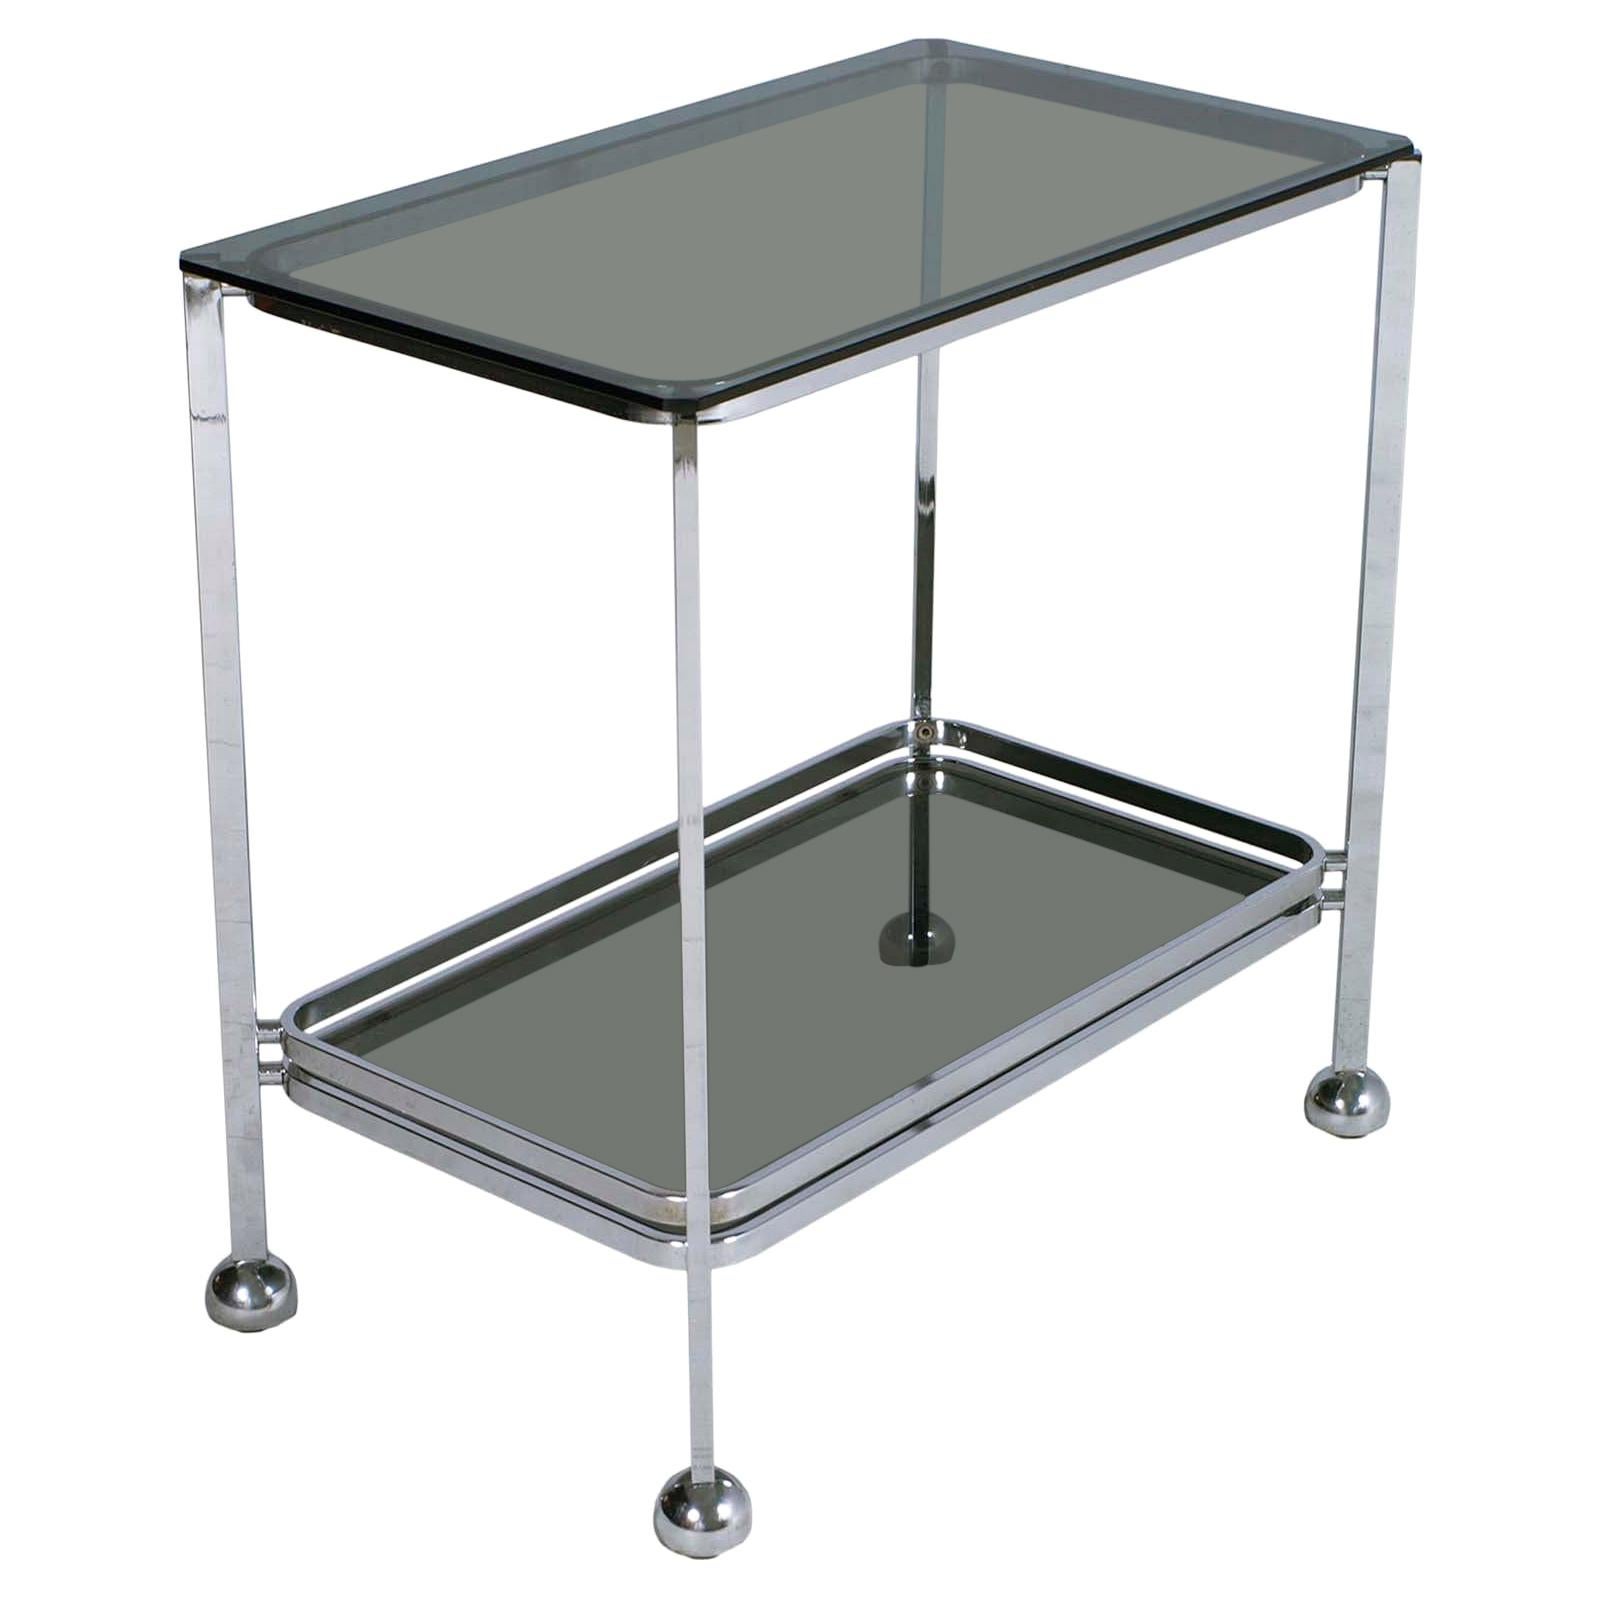 Italy 1970s Minimalist Chrome Steel and Fumè Tempered Glass Trolley Bar Cart For Sale